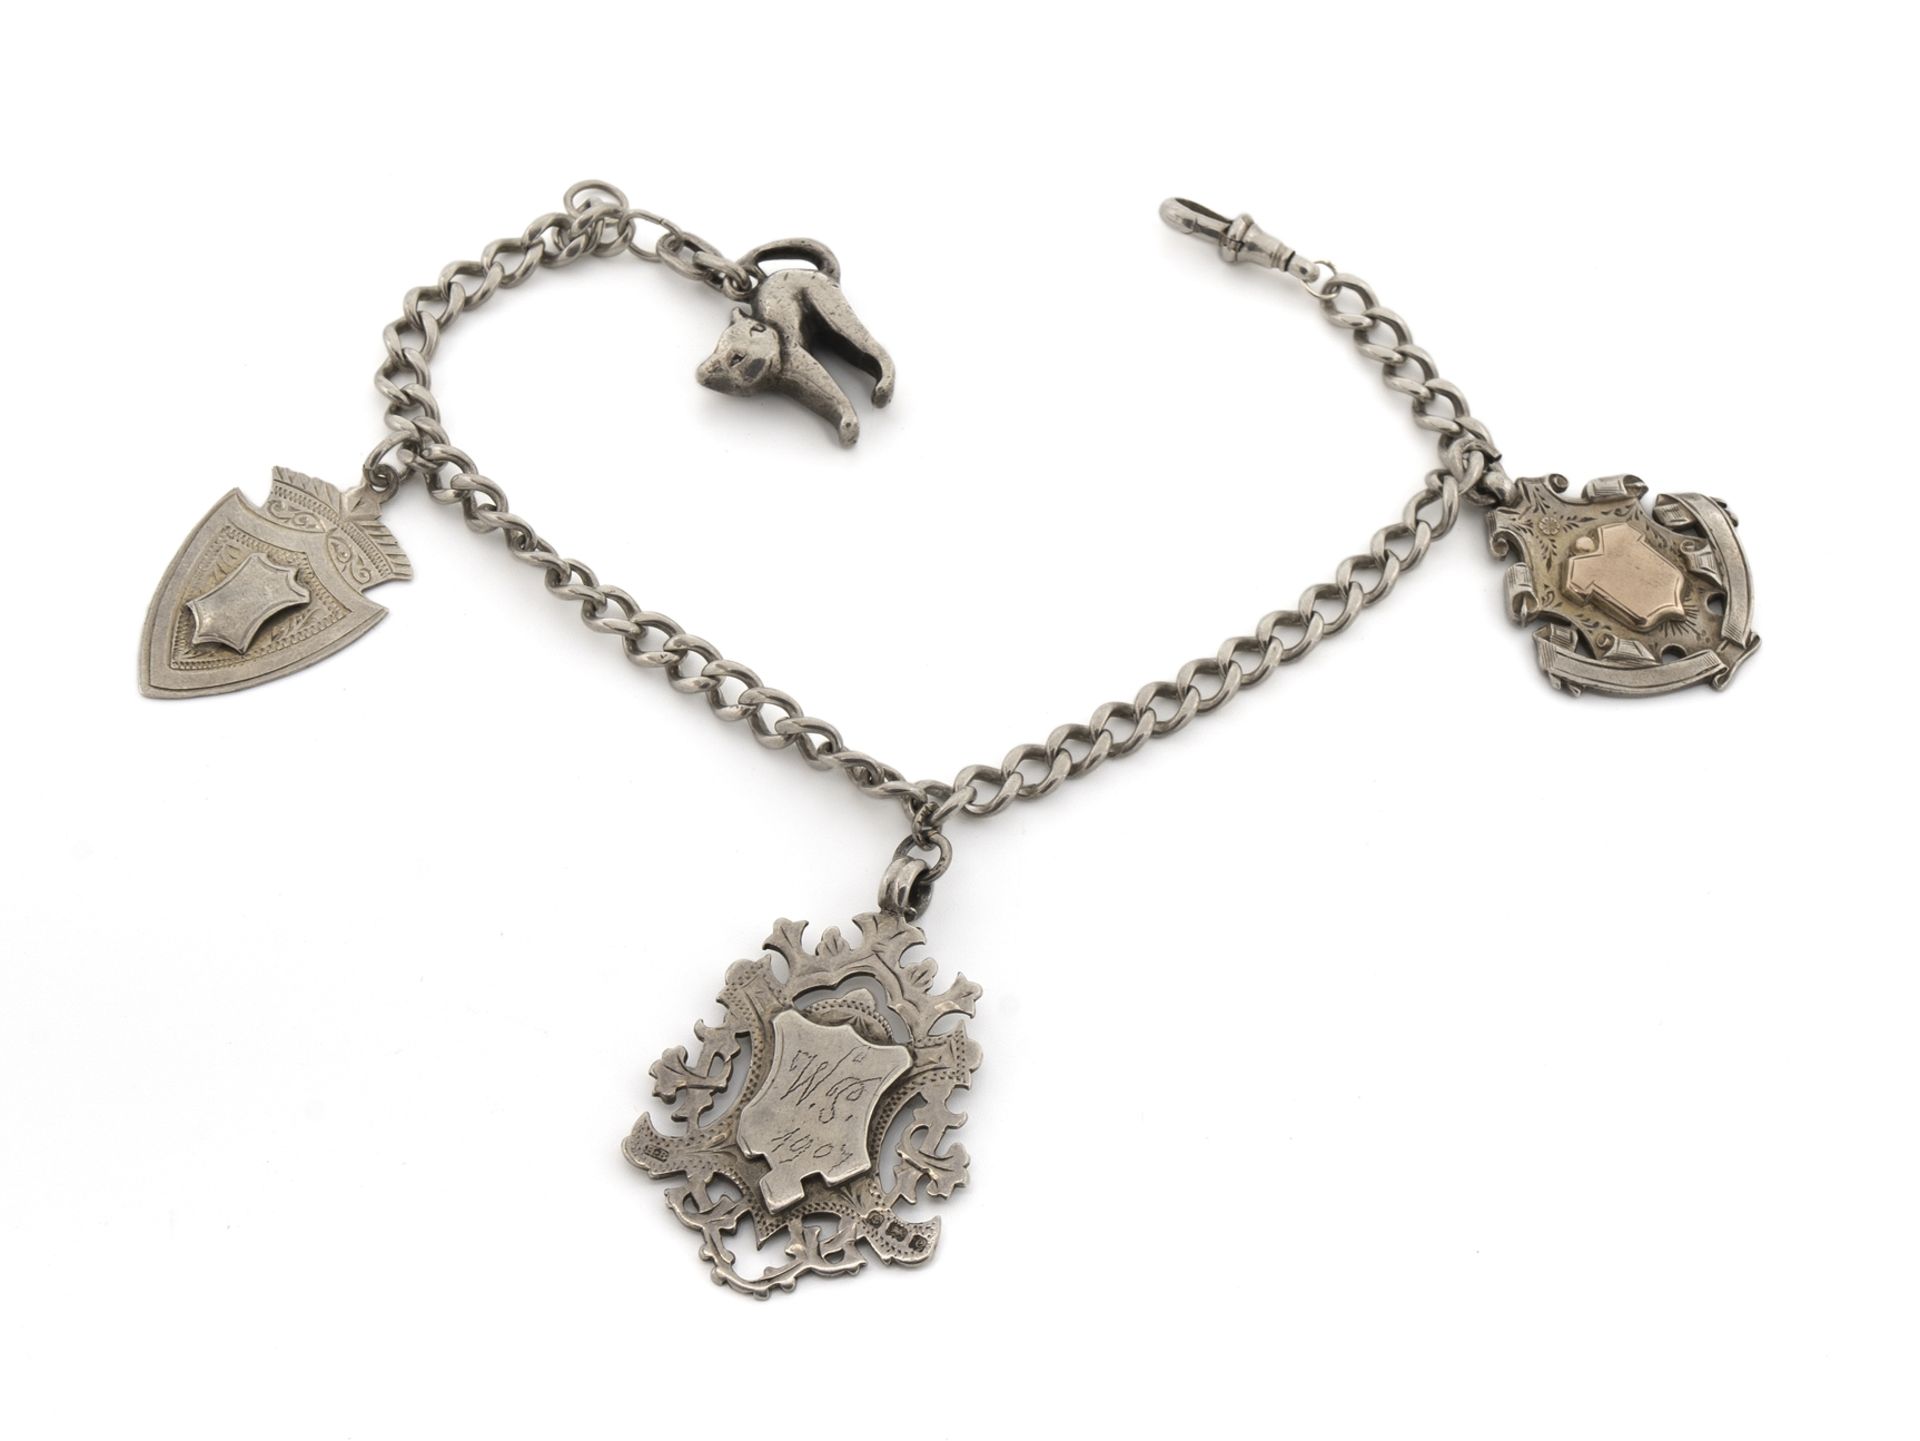 Watch chain sterling silver, Birmingham England, dated 1907 - Image 4 of 4